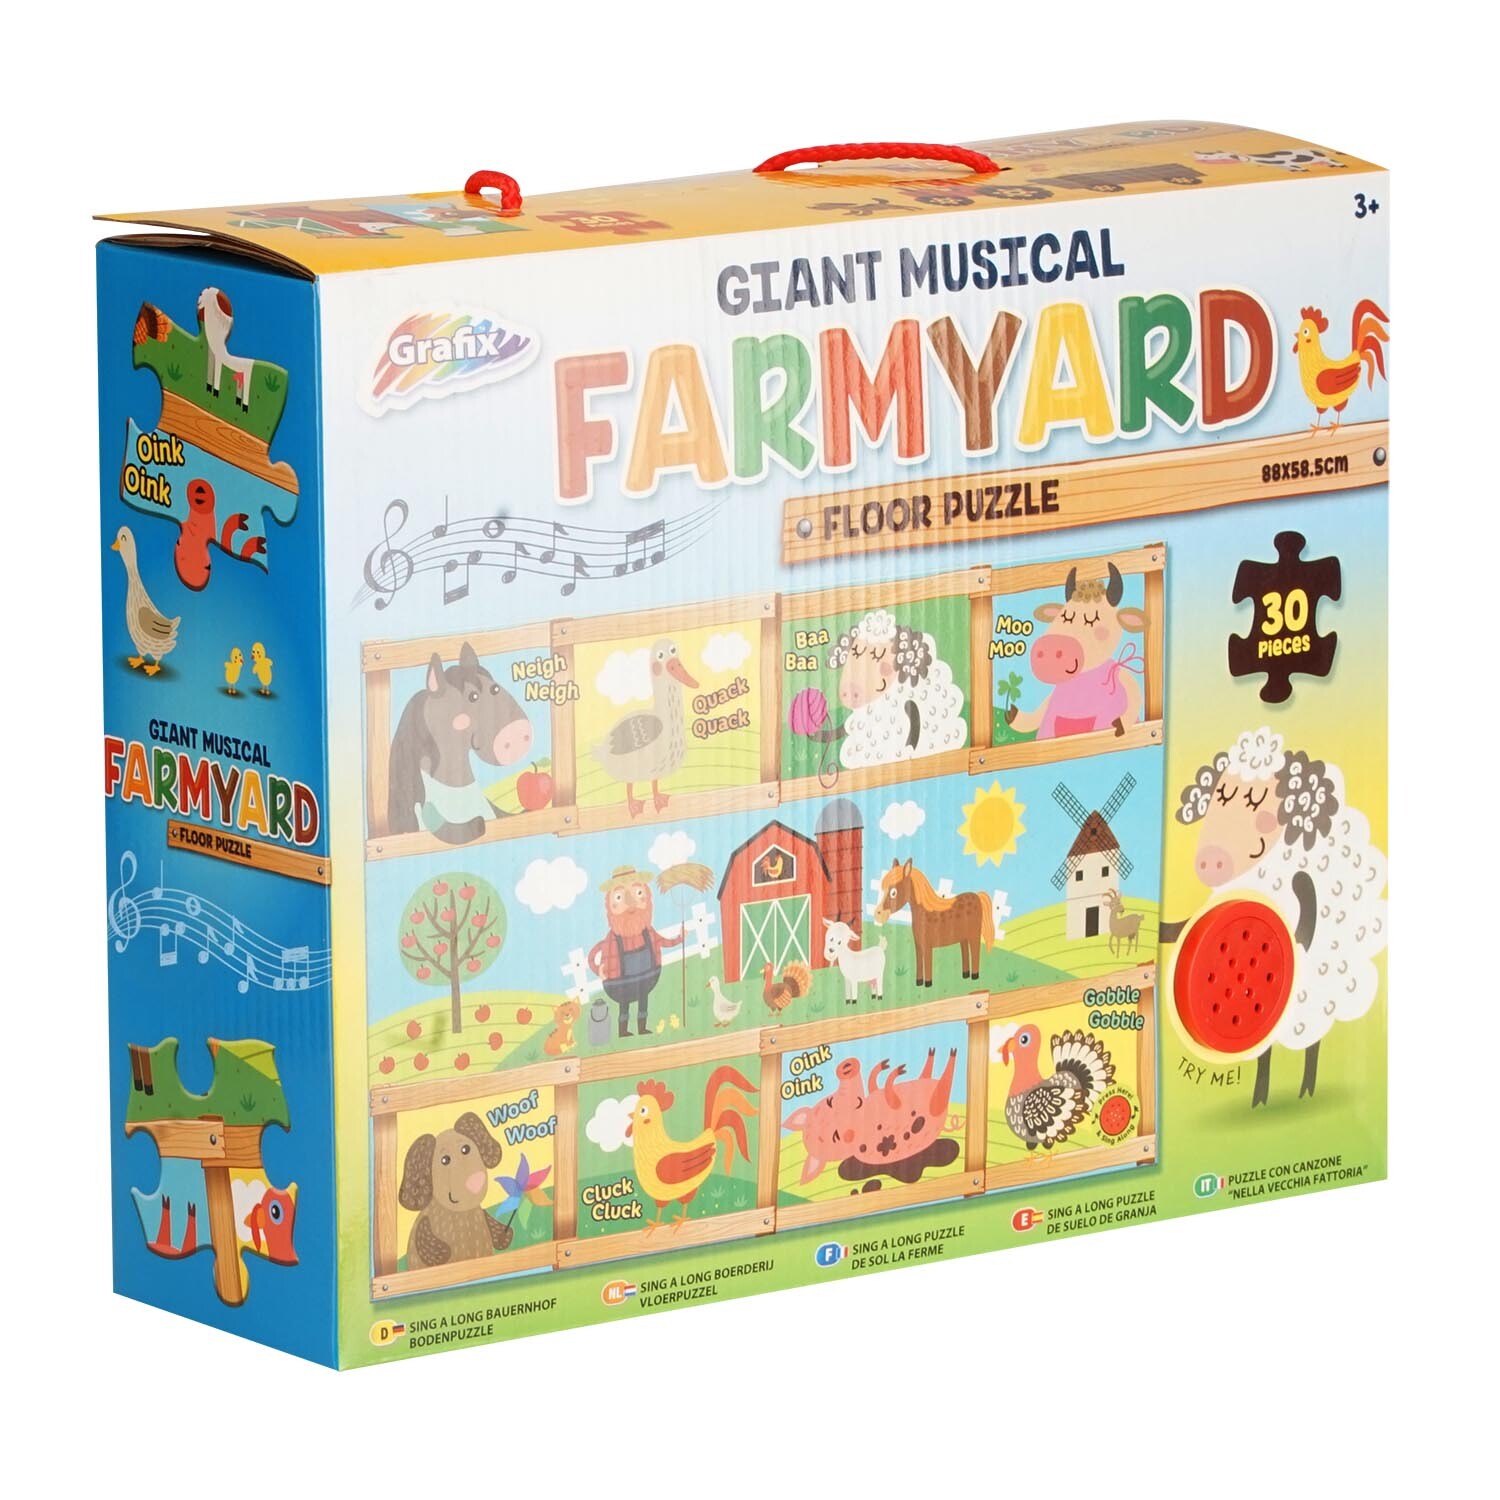 Giant Musical Farmyard Floor Puzzle Image 2